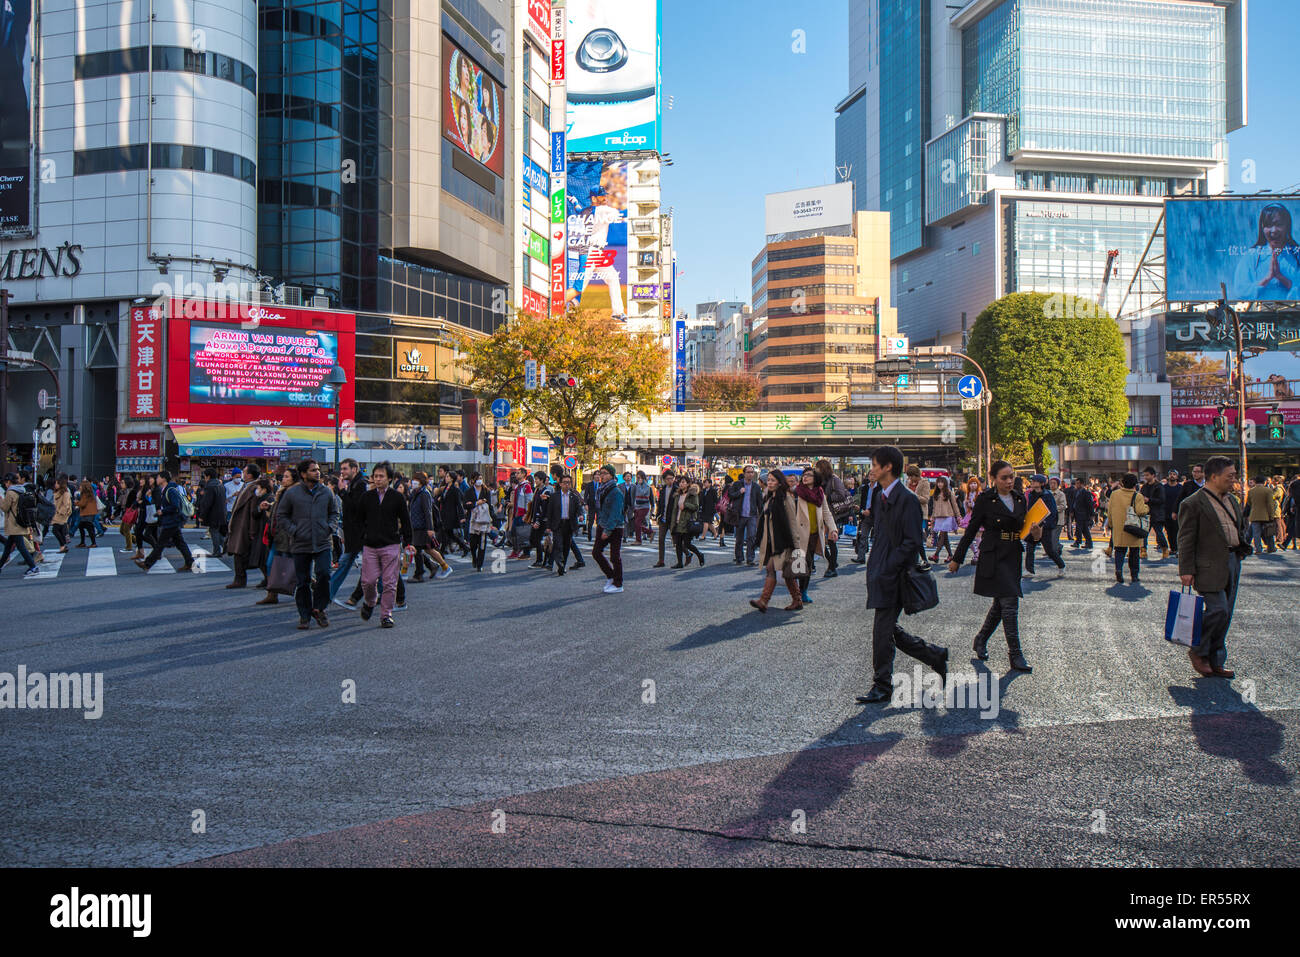 TOKYO, JAPAN - November, 21, 2014: Shibuya crossing in Tokyo, the busiest intersection in the world Stock Photo